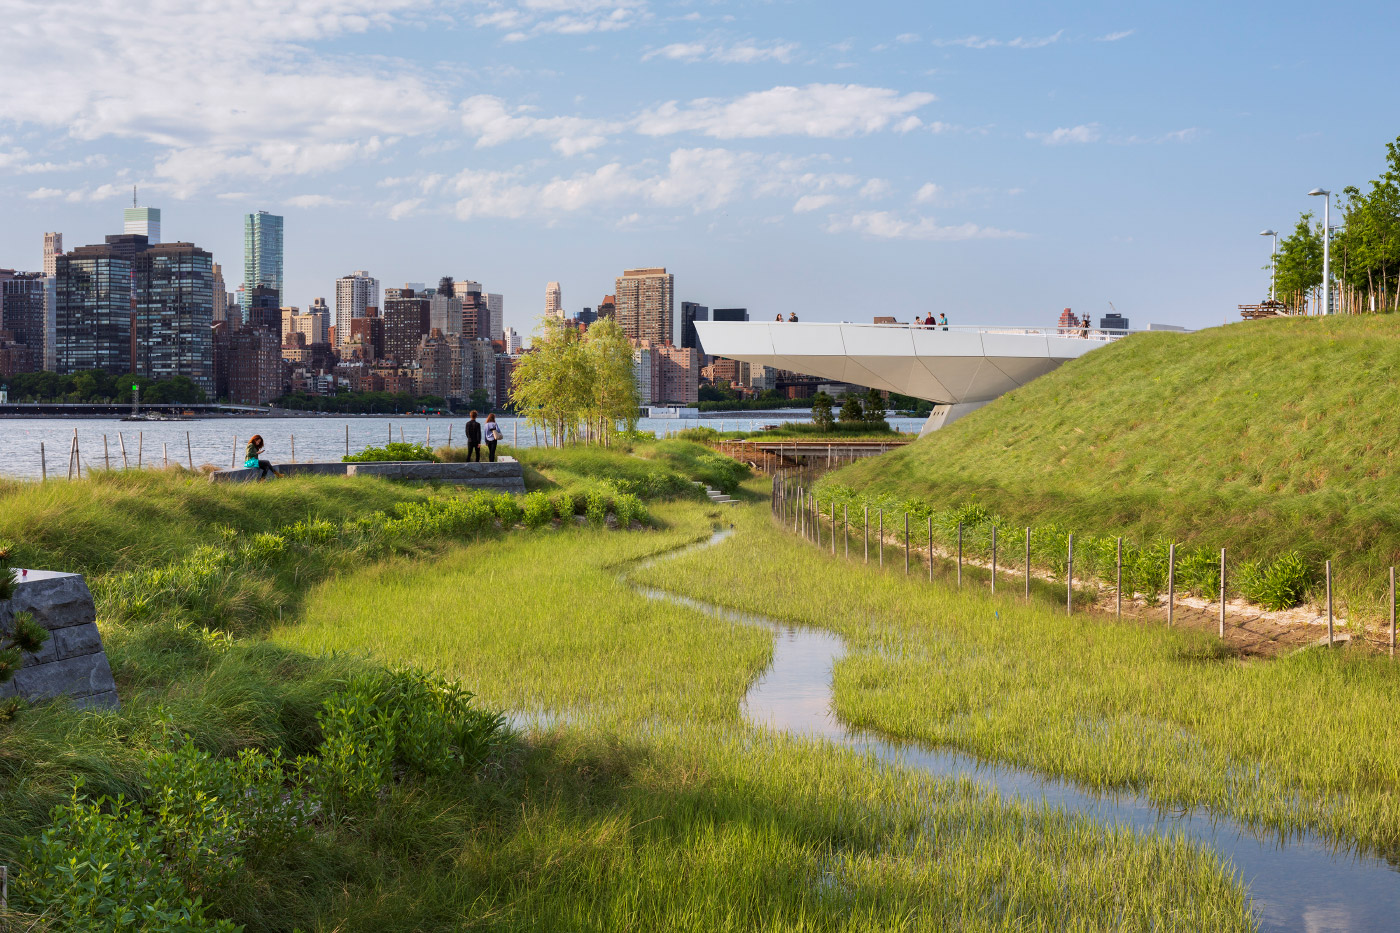 An elevated viewing platform 22 feet in the air lets visitors to Hunter's Point South see out over the marshes.